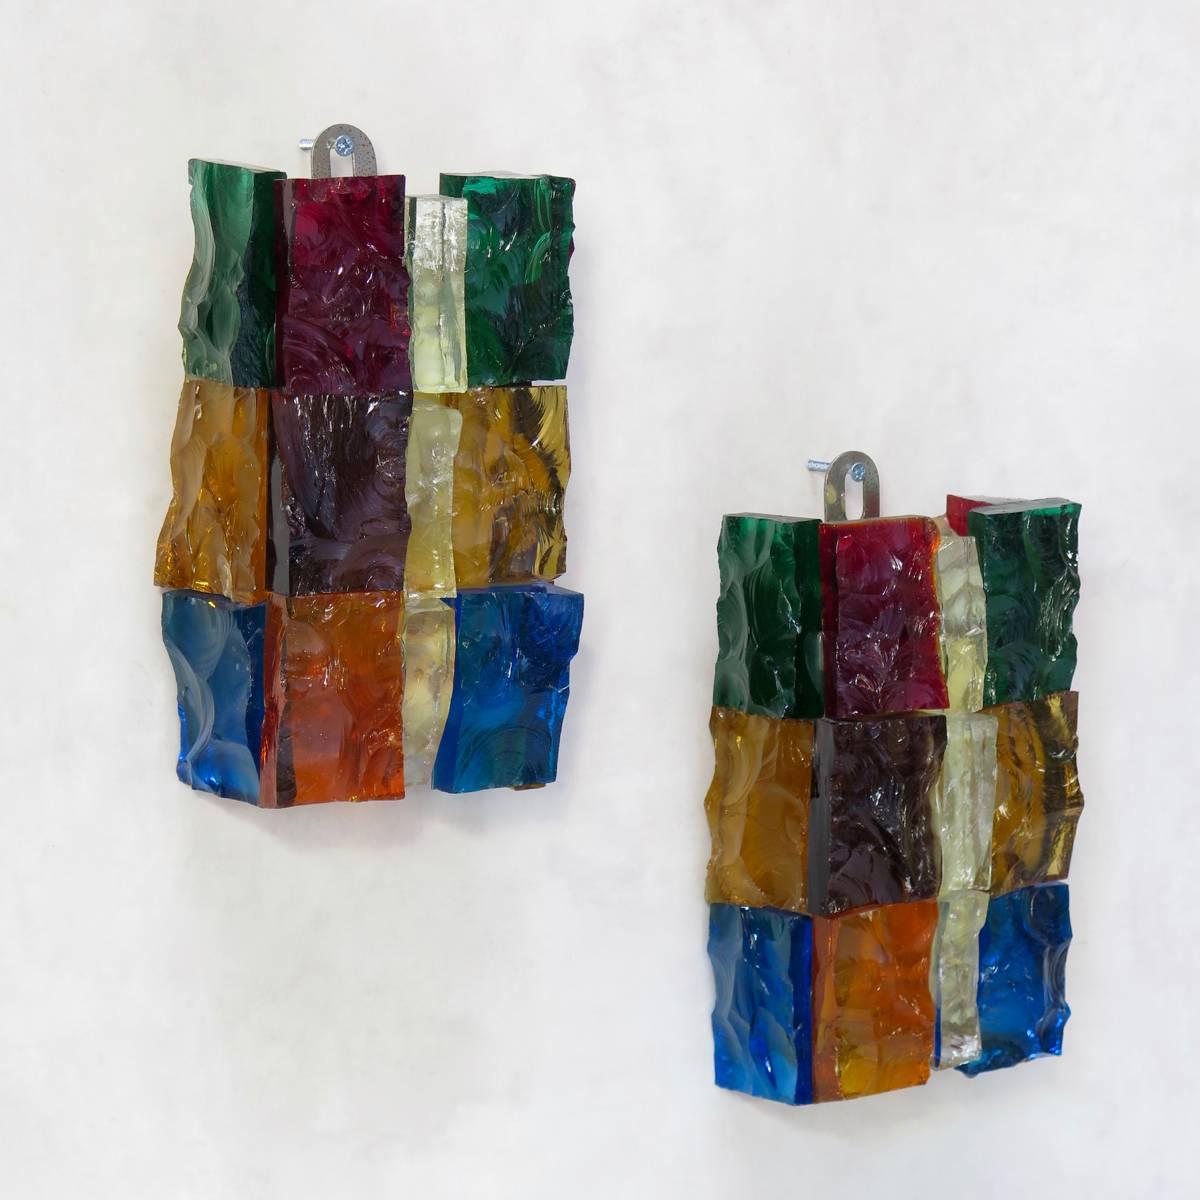 Pair of heavy, glass, "Brutalist" style sconces with a rough-hewn exterior, made of various colorful glass pieces, assembled together. The inside is smooth.